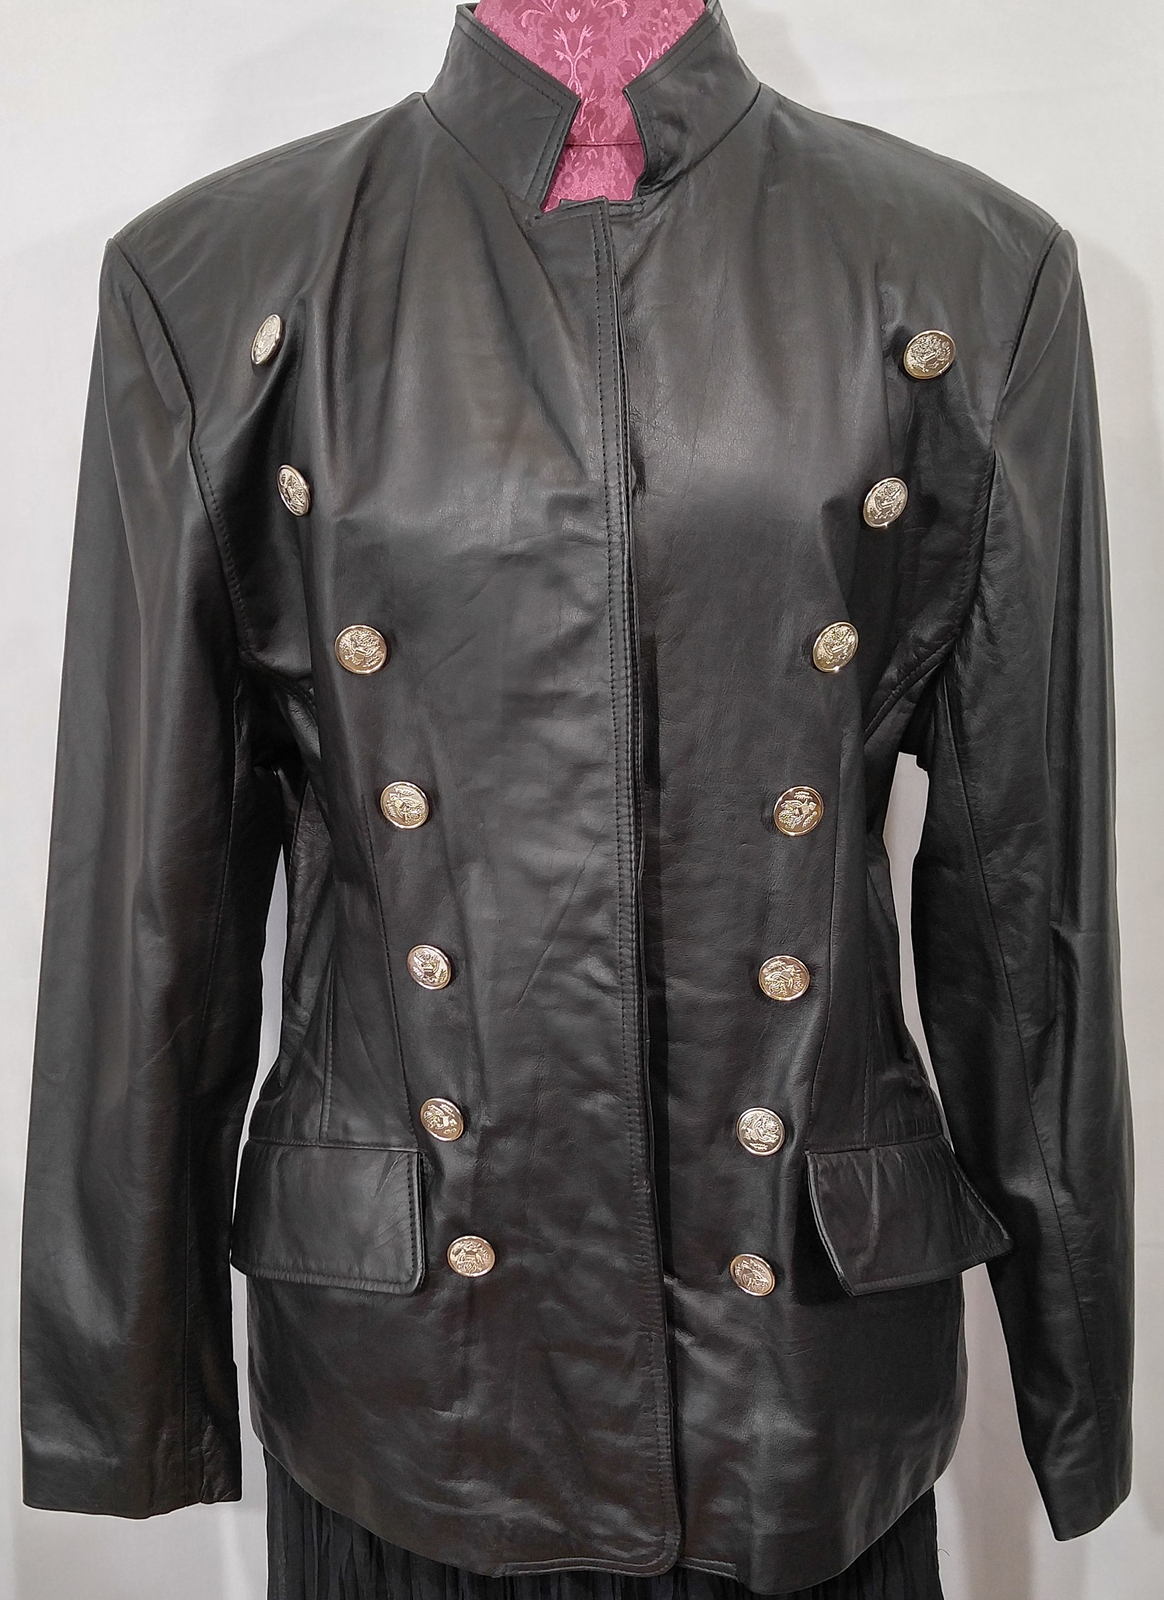 Primary image for Vintage 1990s Virginia Slims Leather Double-Buttoned Military Style Jacket Large